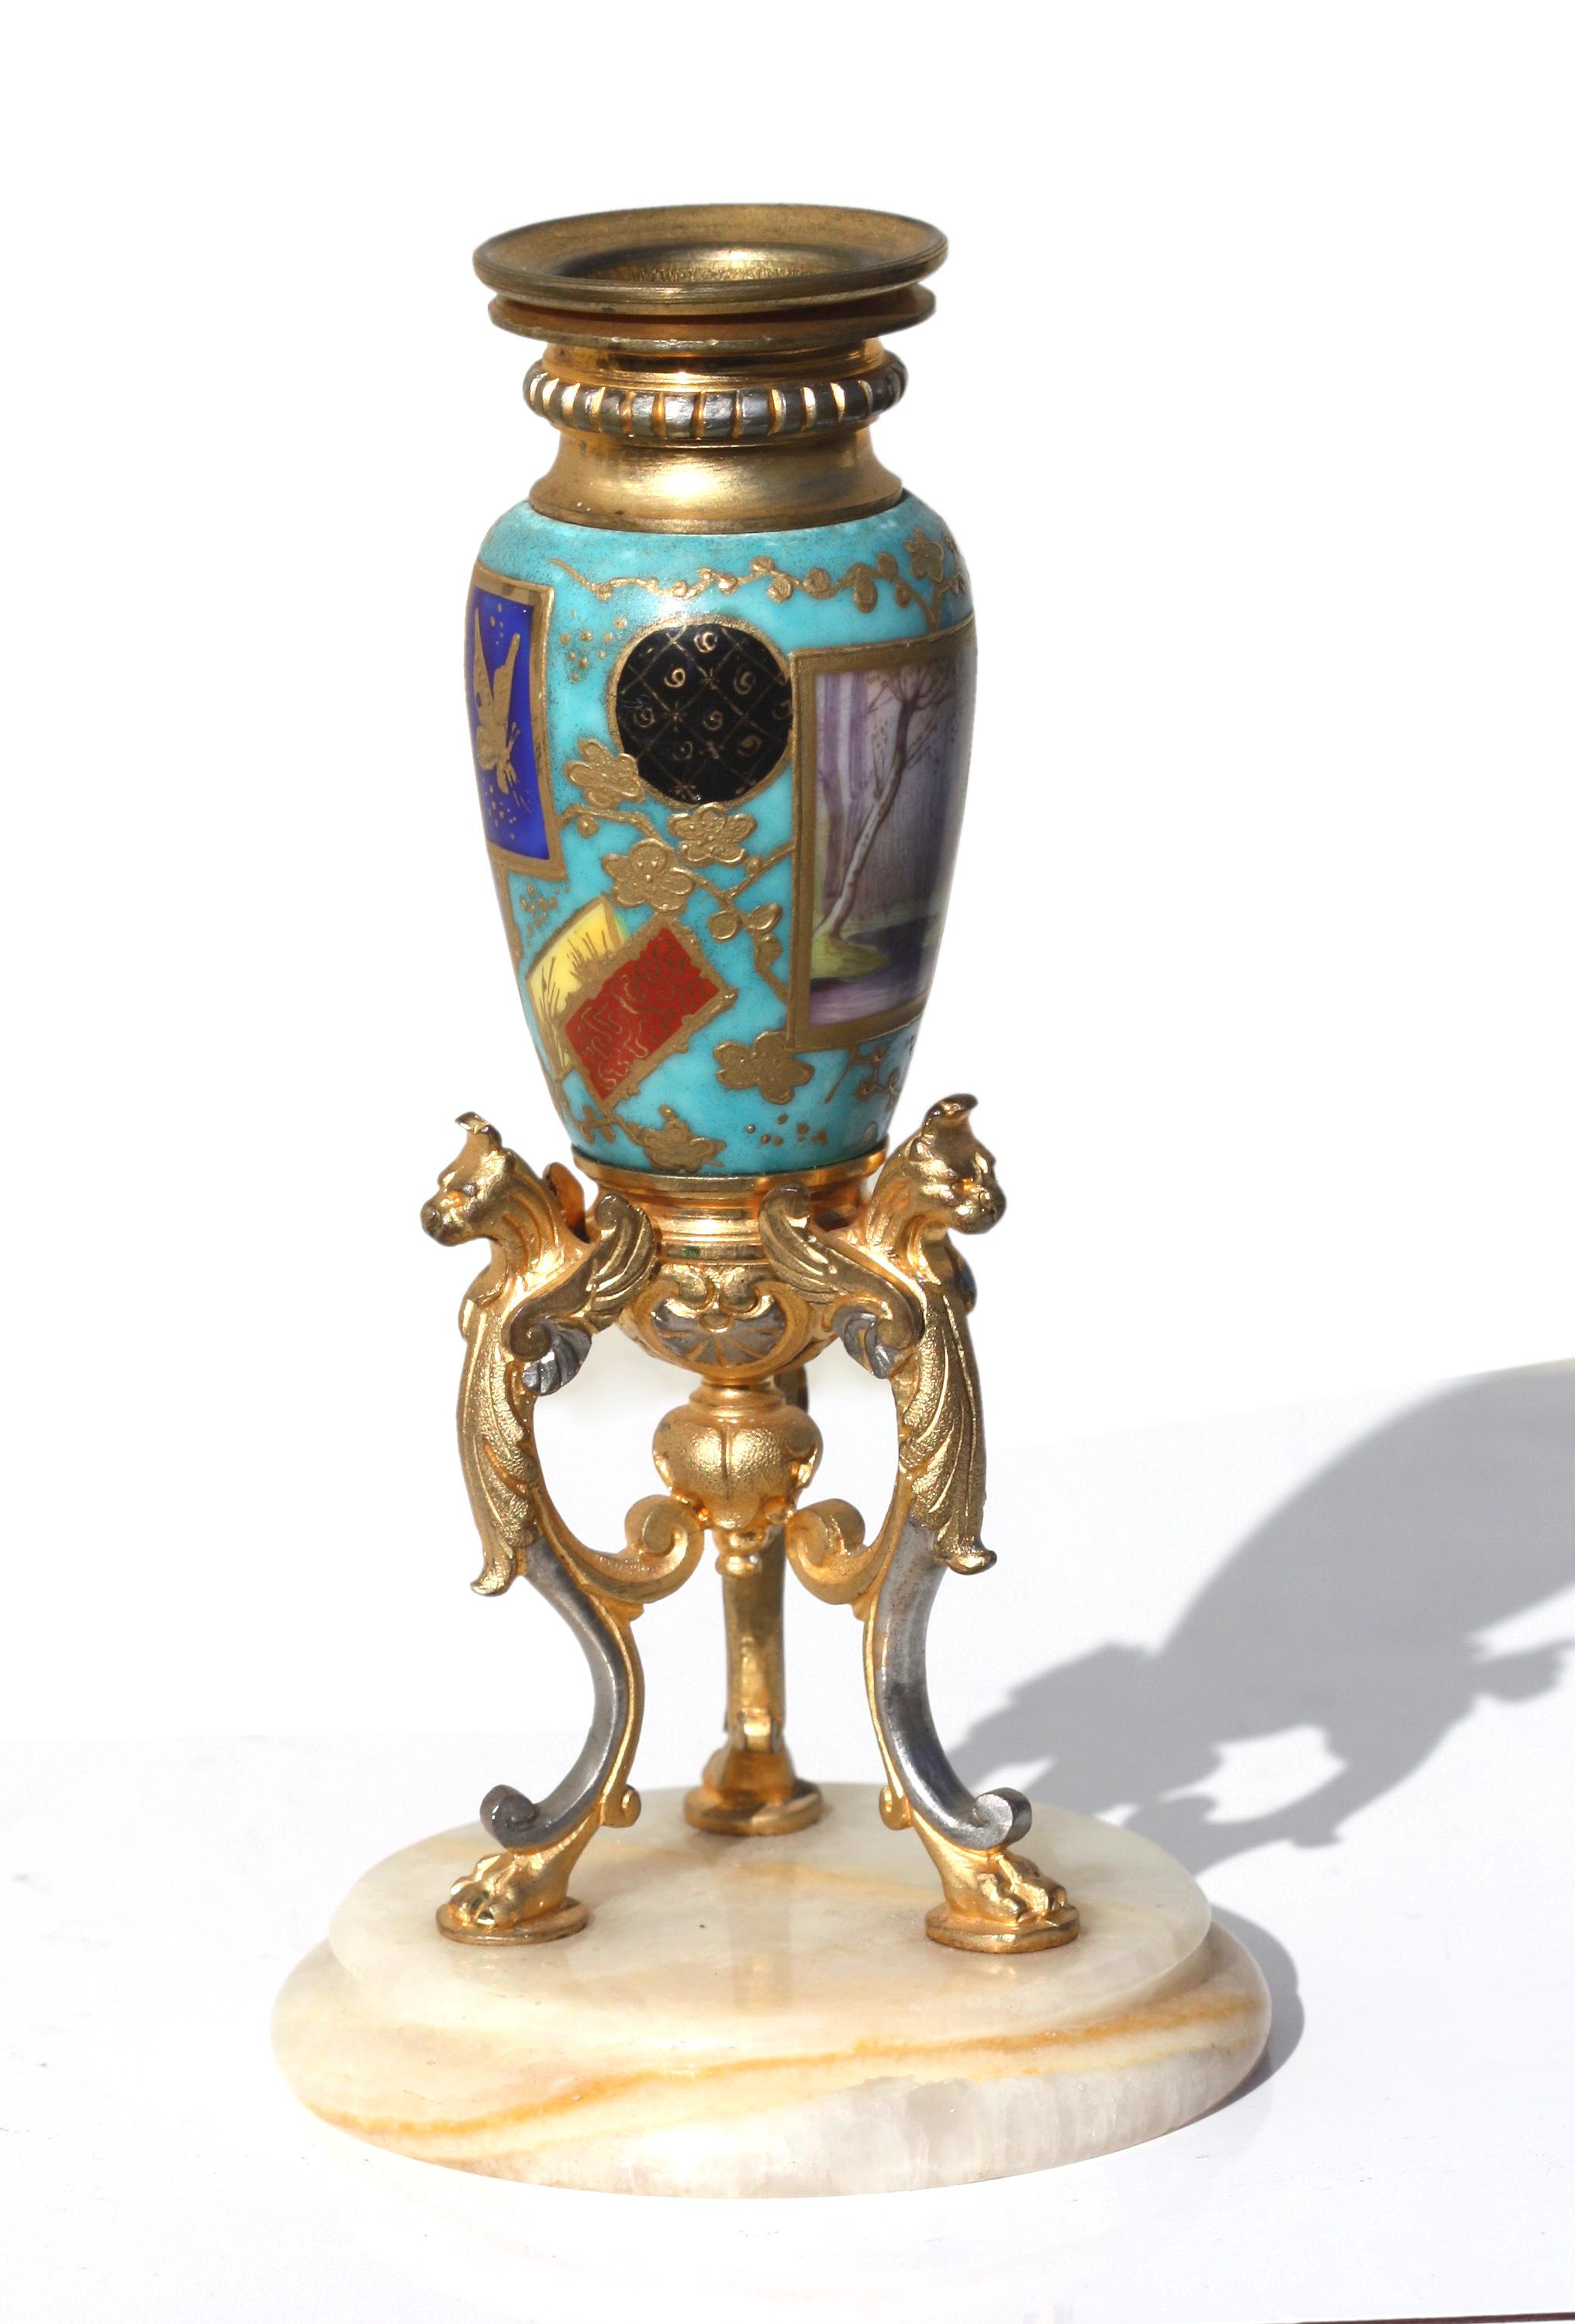 A French gilt-bronze and Sevrès style porcelain-mounted candle stick
19th century, the bronzes in Louis XV / XVI Transitional style, on a onyx stepped round base
height 6 inches, width 3 1/8 inches.
 